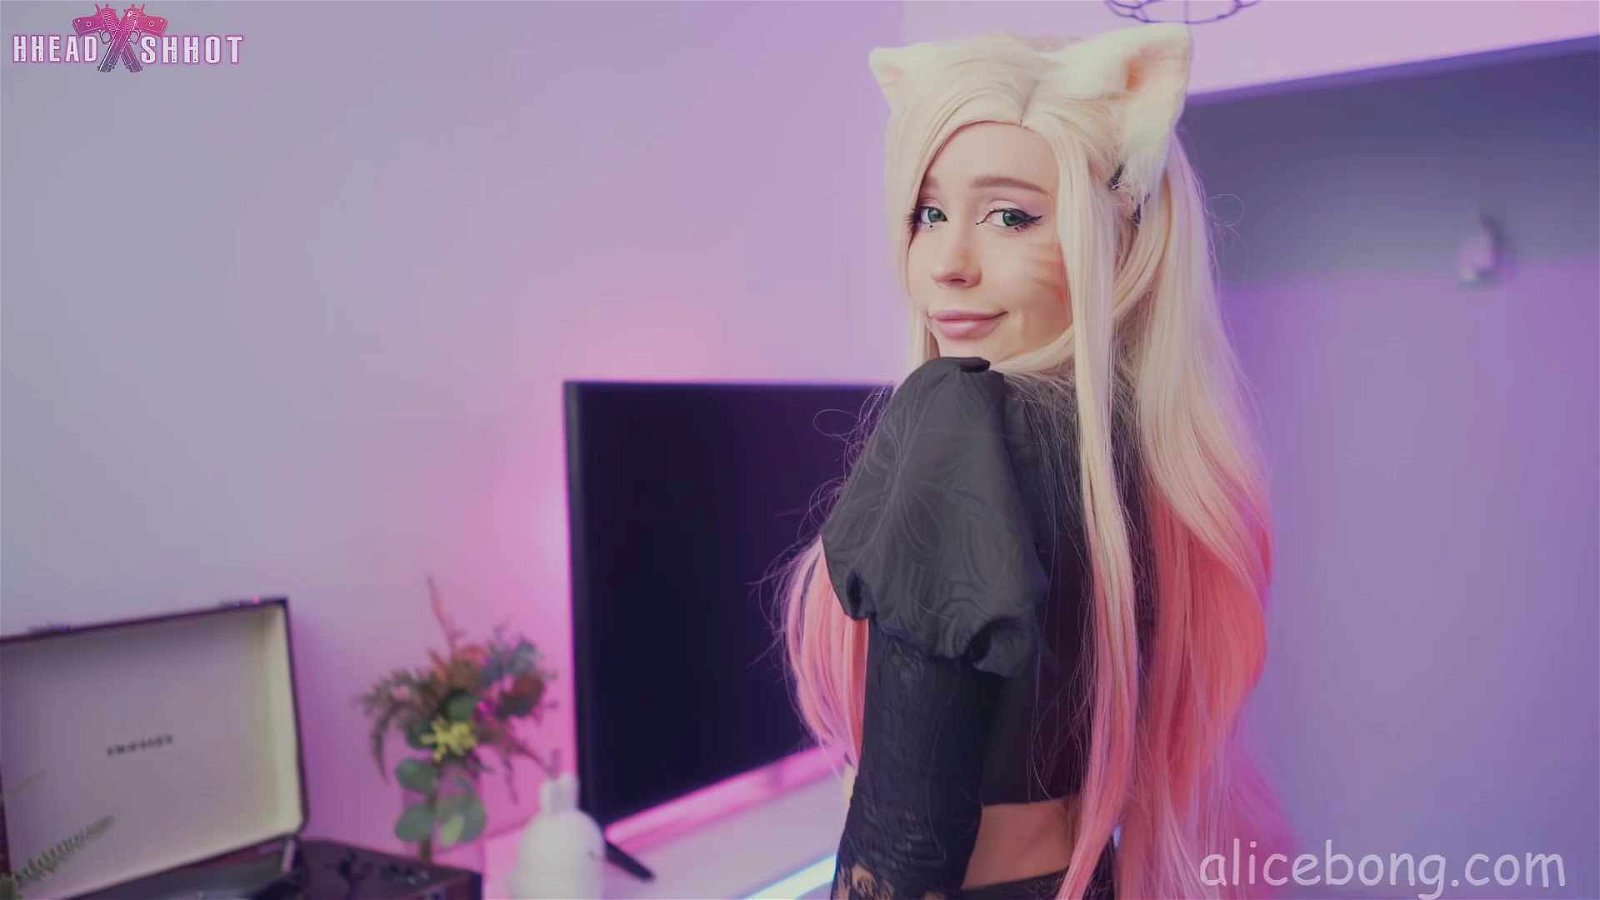 Alice Bong on Pop Porn Day, boobs, cosplay, blonde, teen, stockings, legs-up, doggy videos, her instagram, twitter, onlyfans, fansly, pornhub links